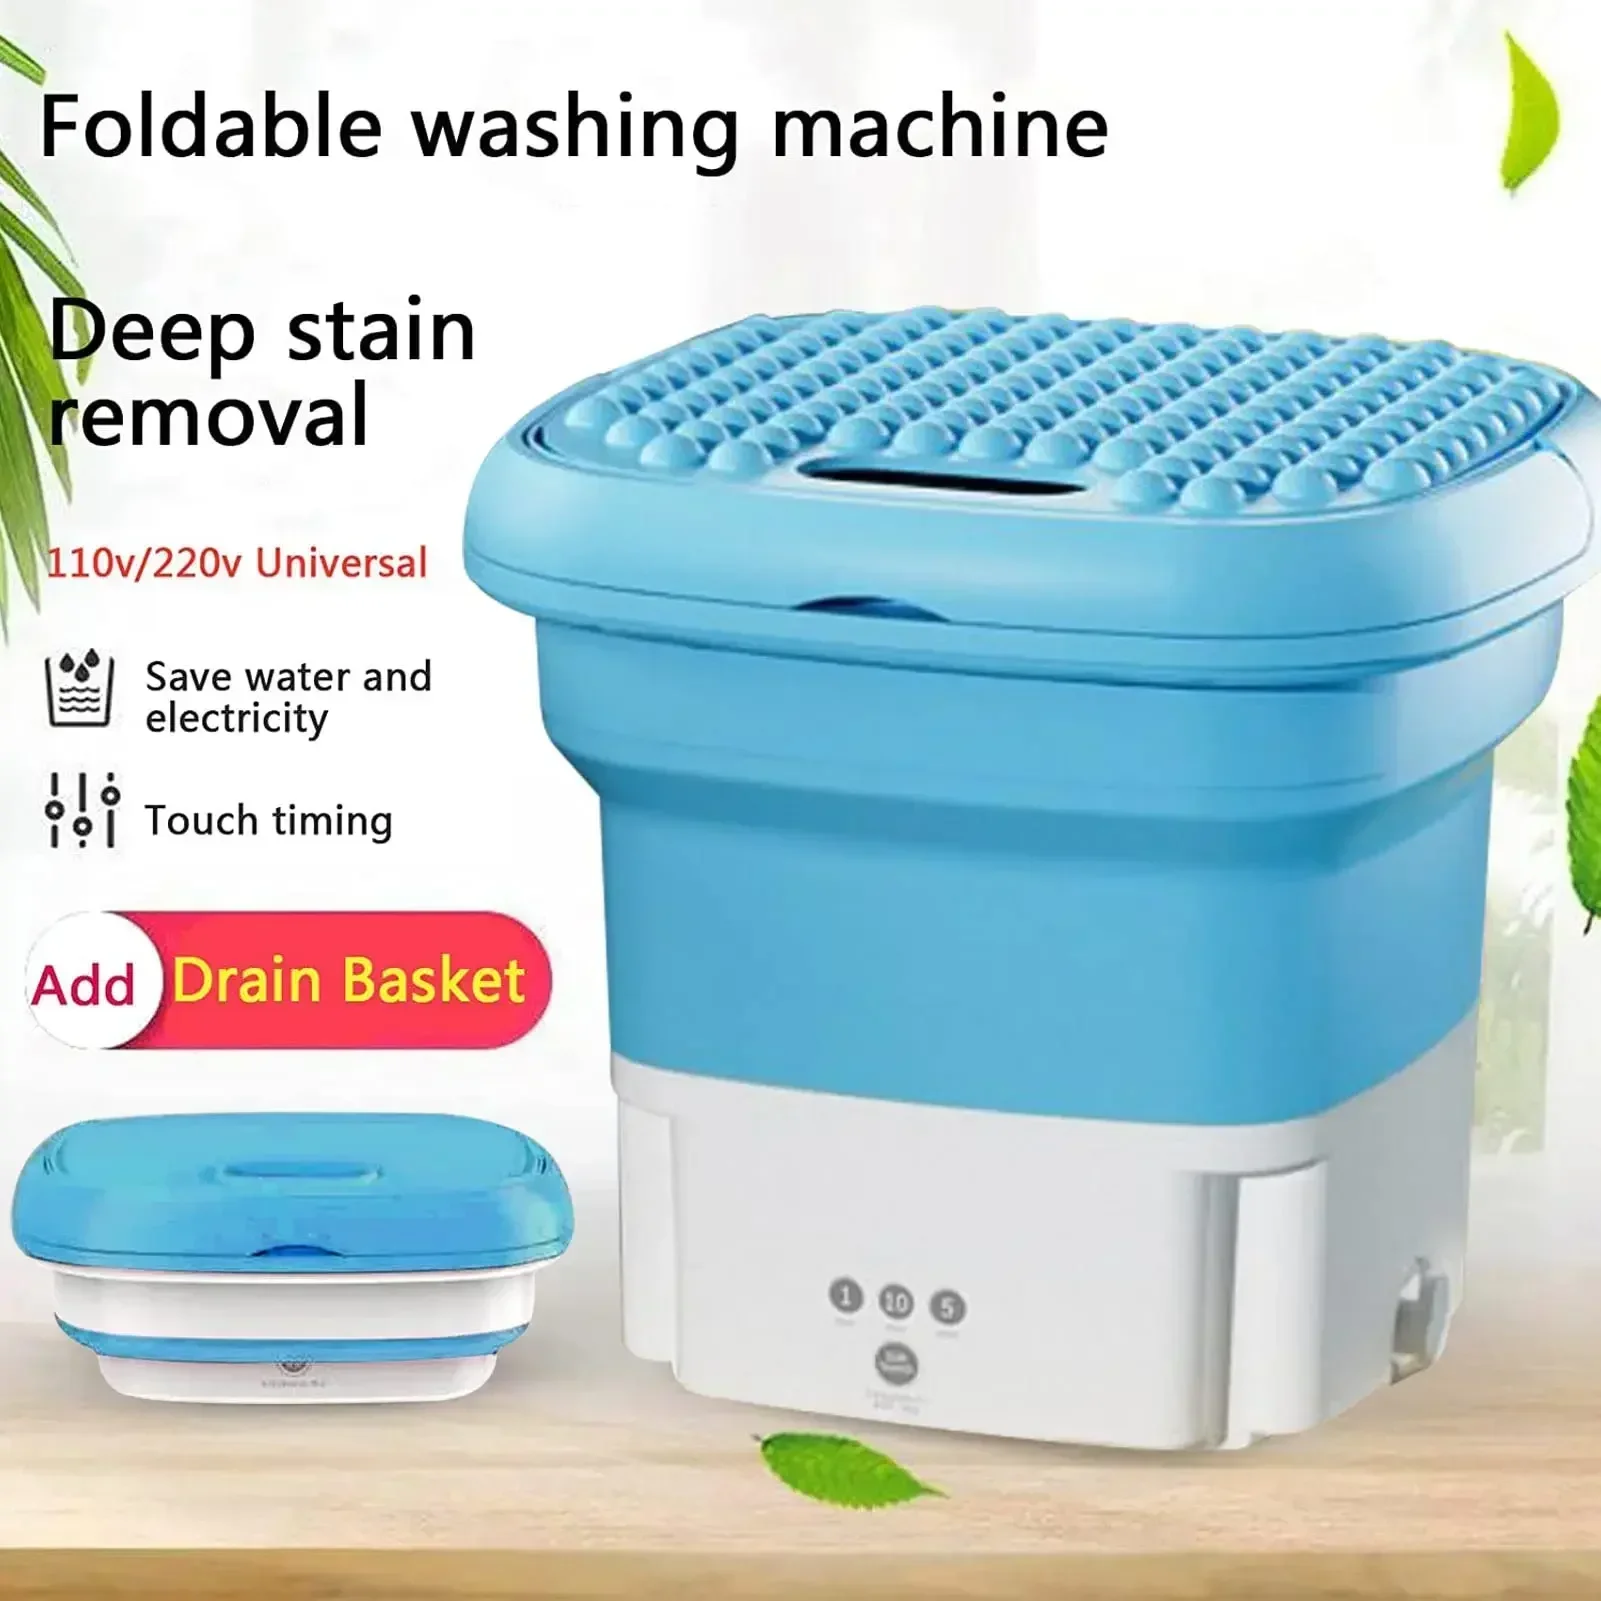 

Folding Portable Washing Machine With Dryer Bucket for Clothes Socks Underwear Mini Cleaning Machines Centrifugal Washer Travel